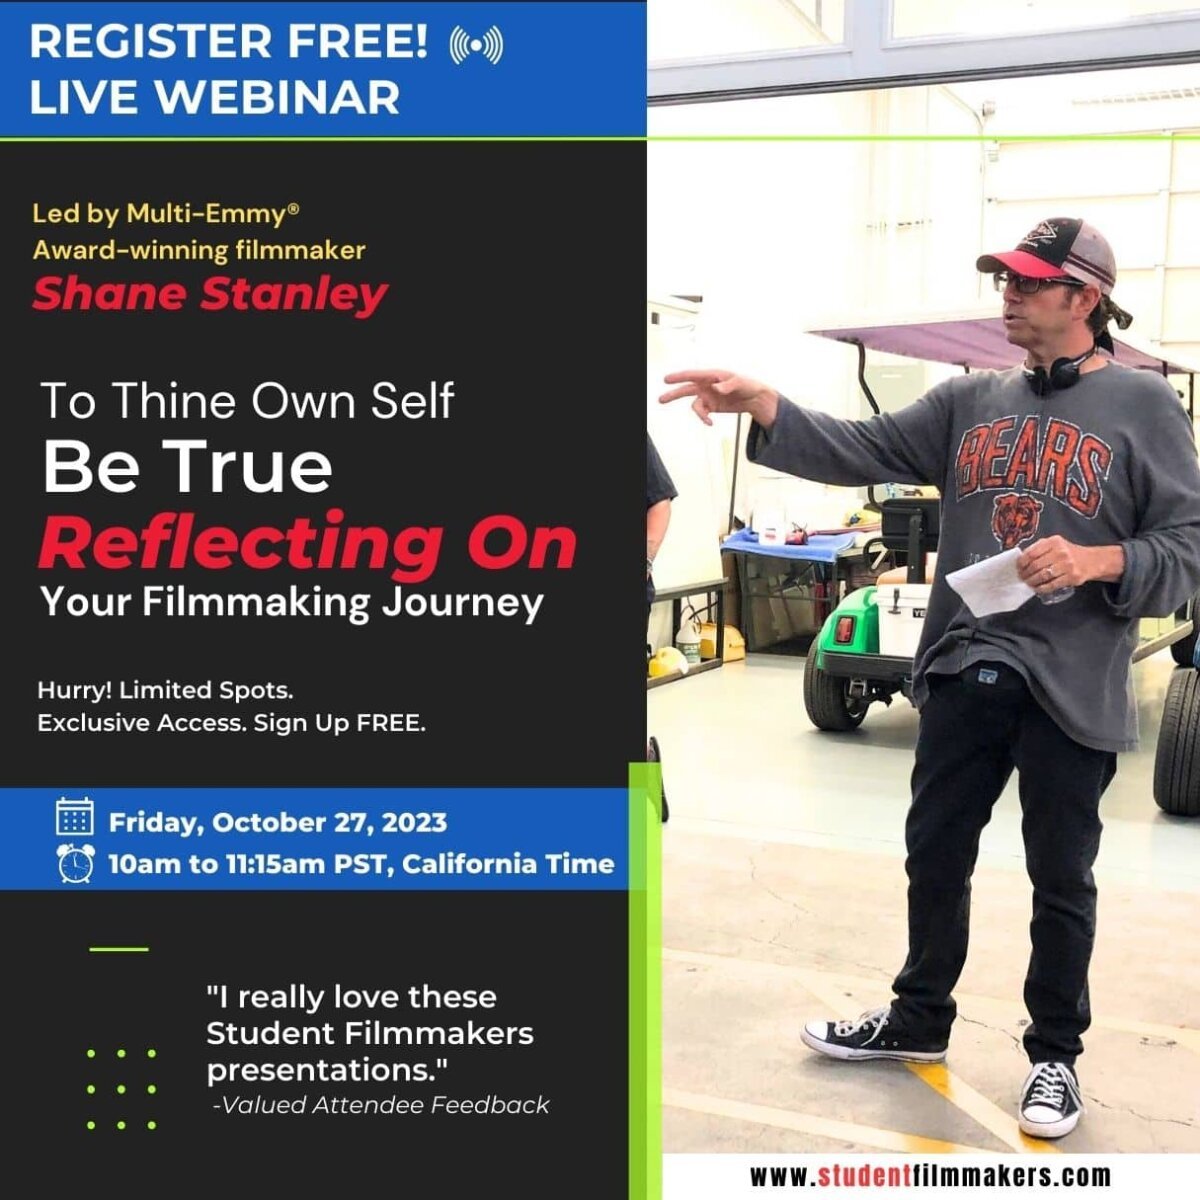 "To Thine Own Self Be True: Reflecting on Your Filmmaking Journey" with Multi-Emmy® Award-Winning Filmmaker Shane Stanley